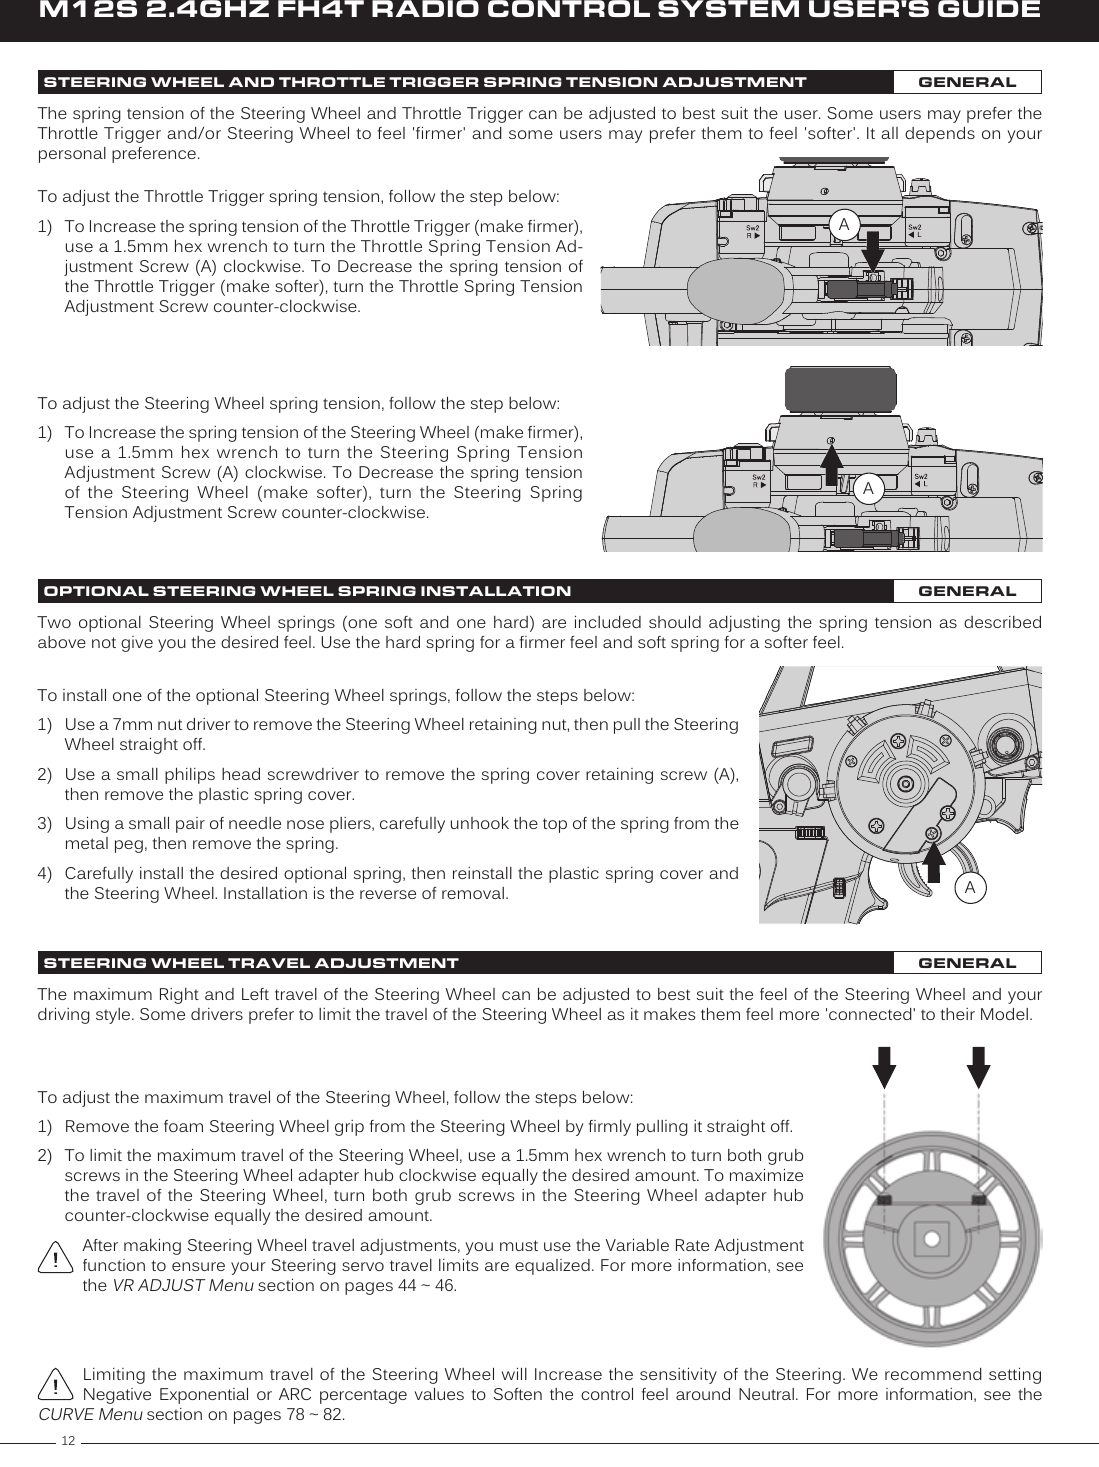 12M12S 2.4GHZ FH4T RADIO CONTROL SYSTEM USER&apos;S GUIDETo adjust the Steering Wheel spring tension, follow the step below:1)  To Increase the spring tension of the Steering Wheel (make firmer), use a  1.5mm  hex  wrench  to  turn  the  Steering  Spring  Tension Adjustment Screw (A) clockwise. To Decrease the spring tension of  the  Steering  Wheel  (make  softer),  turn  the  Steering  Spring Tension Adjustment Screw counter-clockwise.The spring tension of the Steering Wheel and Throttle Trigger can be adjusted to best suit the user. Some users may prefer the Throttle Trigger and/or Steering Wheel to feel &apos;firmer&apos; and some users may prefer them to feel &apos;softer&apos;. It all depends on your personal preference.ATo adjust the Throttle Trigger spring tension, follow the step below:1)  To Increase the spring tension of the Throttle Trigger (make firmer), use a 1.5mm hex wrench to turn the Throttle Spring Tension Ad-justment Screw (A) clockwise. To Decrease the spring tension of the Throttle Trigger (make softer), turn the Throttle Spring Tension Adjustment Screw counter-clockwise.ATwo optional  Steering  Wheel  springs  (one  soft  and  one  hard) are  included  should  adjusting  the  spring  tension  as  described above not give you the desired feel. Use the hard spring for a firmer feel and soft spring for a softer feel.To install one of the optional Steering Wheel springs, follow the steps below: 1)  Use a 7mm nut driver to remove the Steering Wheel retaining nut, then pull the Steering Wheel straight off.2)  Use a small philips head screwdriver to remove the spring cover retaining screw (A), then remove the plastic spring cover.3)  Using a small pair of needle nose pliers, carefully unhook the top of the spring from the metal peg, then remove the spring.4)  Carefully install the desired optional spring, then reinstall the plastic spring cover and the Steering Wheel. Installation is the reverse of removal. AThe maximum Right and Left travel of the Steering Wheel can be adjusted to best suit the feel of the Steering Wheel and your driving style. Some drivers prefer to limit the travel of the Steering Wheel as it makes them feel more &apos;connected&apos; to their Model.Limiting the maximum travel of the Steering Wheel will Increase the sensitivity of the Steering. We recommend setting Negative  Exponential  or  ARC  percentage  values  to  Soften  the  control  feel  around  Neutral.  For  more  information,  see  the CURVE Menu section on pages 78 ~ 82.To adjust the maximum travel of the Steering Wheel, follow the steps below:1)  Remove the foam Steering Wheel grip from the Steering Wheel by firmly pulling it straight off.2)  To limit the maximum travel of the Steering Wheel, use a 1.5mm hex wrench to turn both grub screws in the Steering Wheel adapter hub clockwise equally the desired amount. To maximize the travel  of the Steering  Wheel, turn  both grub screws  in the Steering  Wheel adapter hub counter-clockwise equally the desired amount.After making Steering Wheel travel adjustments, you must use the Variable Rate Adjustment function to ensure your Steering servo travel limits are equalized. For more information, see the VR ADJUST Menu section on pages 44 ~ 46.STEERING WHEEL AND THROTTLE TRIGGER SPRING TENSION ADJUSTMENT GENERALOPTIONAL STEERING WHEEL SPRING INSTALLATION GENERALSTEERING WHEEL TRAVEL ADJUSTMENT GENERAL